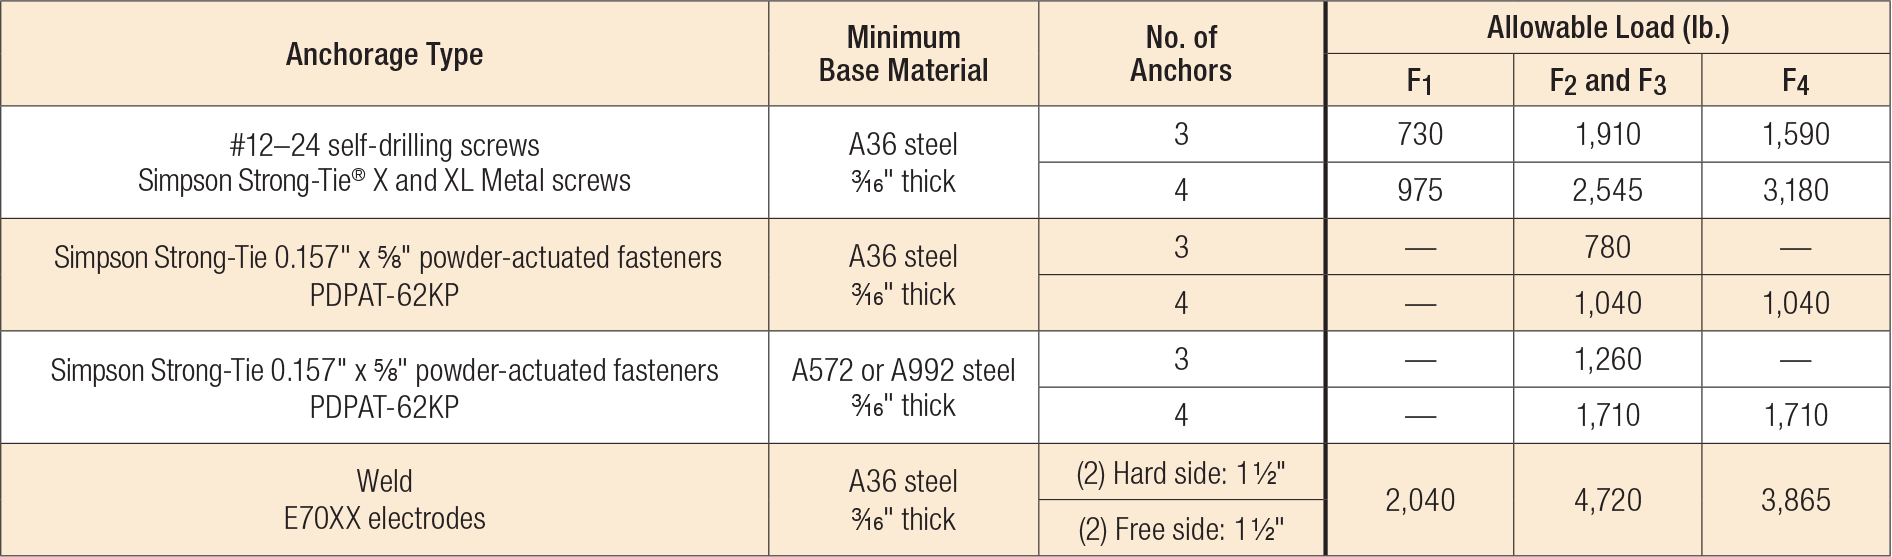 Load Table - FC Allowable Anchorage Loads to Steel